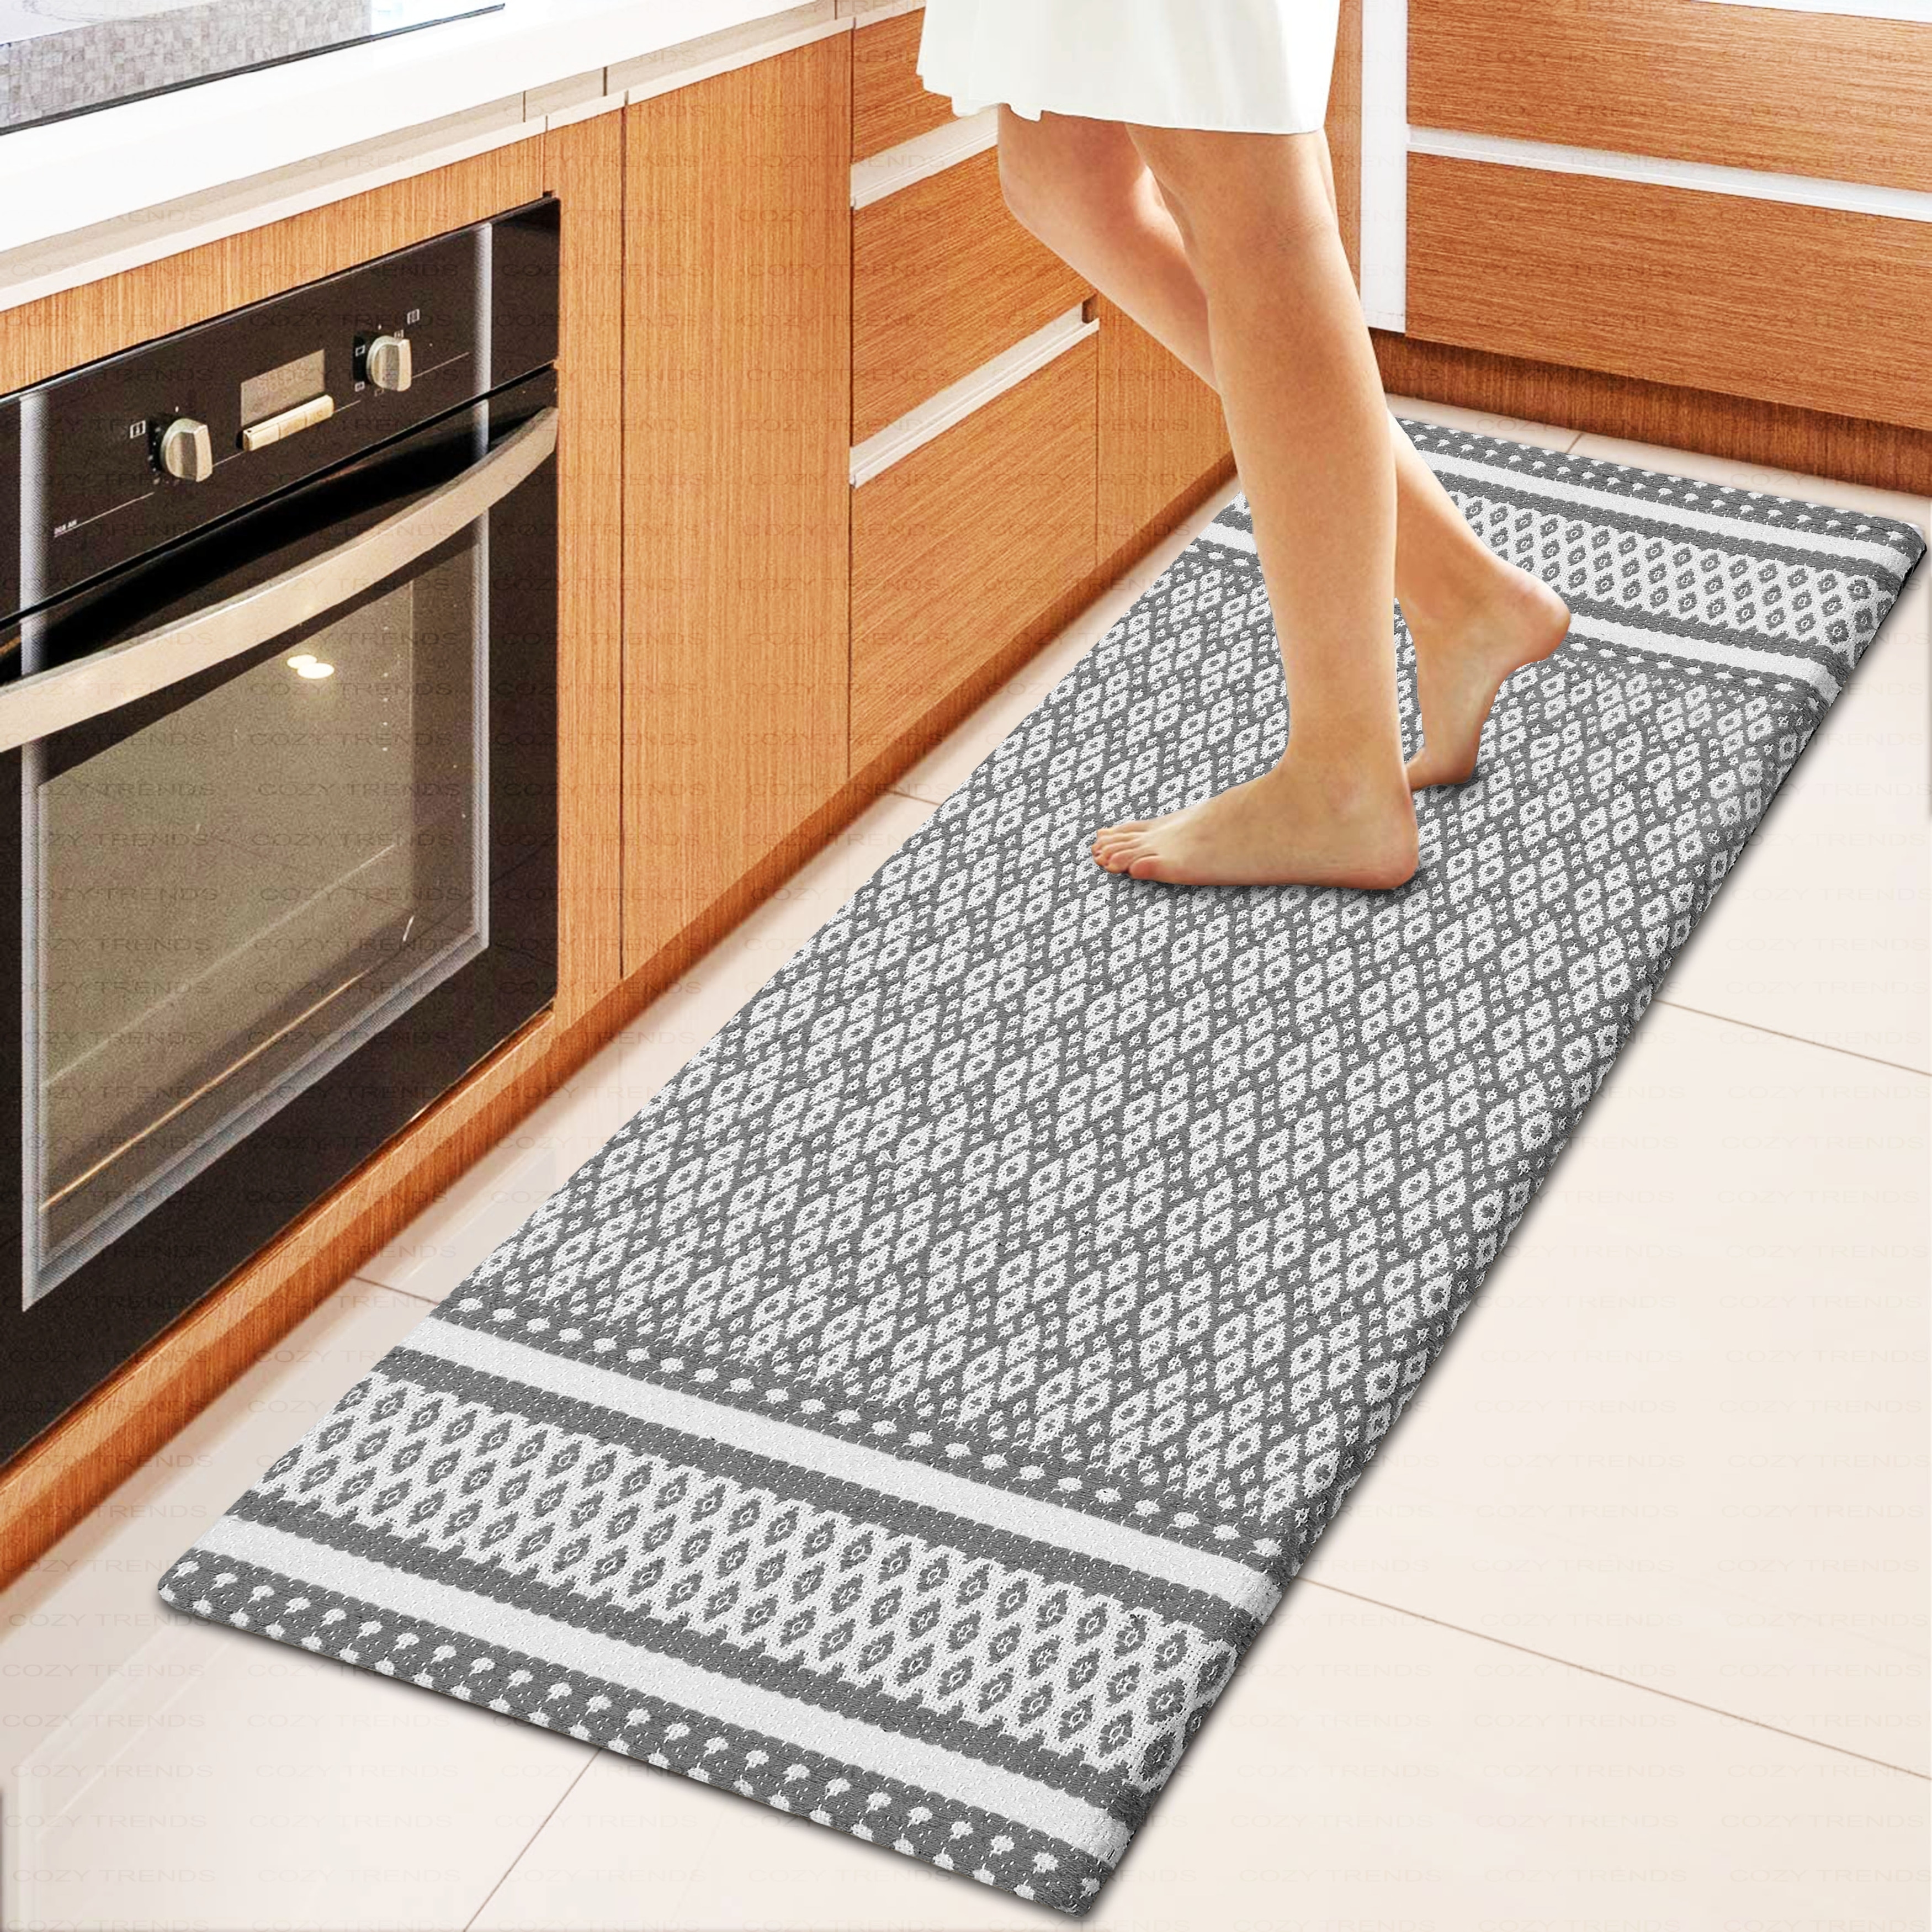 https://ak1.ostkcdn.com/images/products/is/images/direct/9f65a21630cbbd33530b0a074ce71a6ce1122997/Kitchen-Runner-Rug--Mat-Cushioned-Cotton-Hand-Woven-Anti-Fatigue-Mat-Kitchen-Bathroom-Bed-side-18x48%27%27.jpg